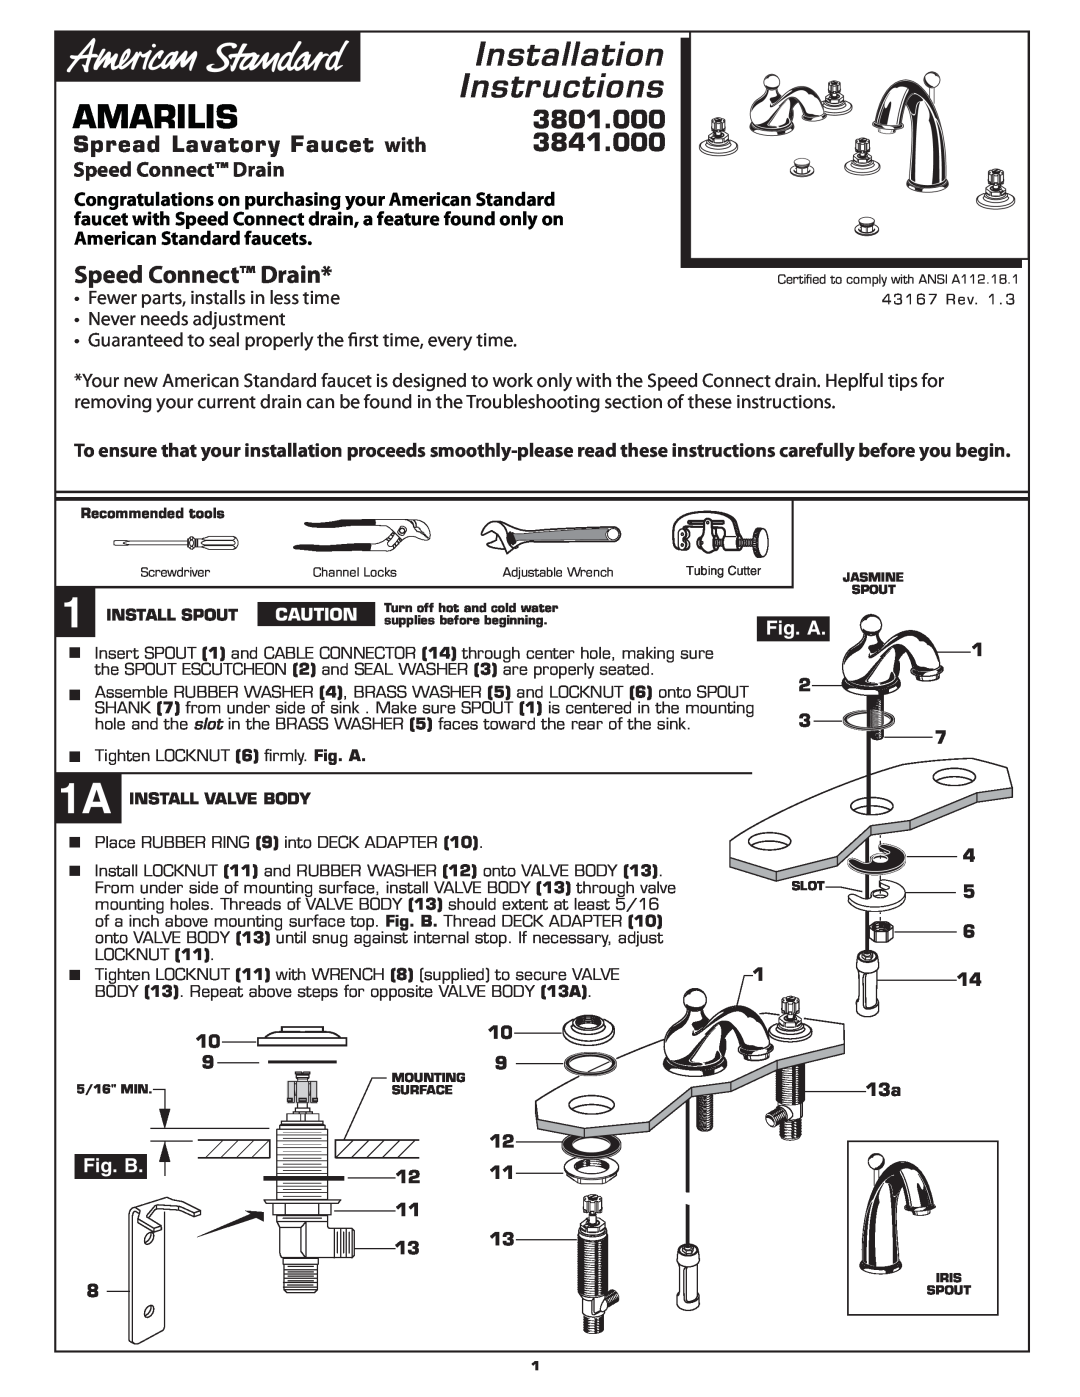 American Standard 3801.000 installation instructions 3841.000, Speed Connect Drain, Spread Lavatory Faucet with, Amarilis 